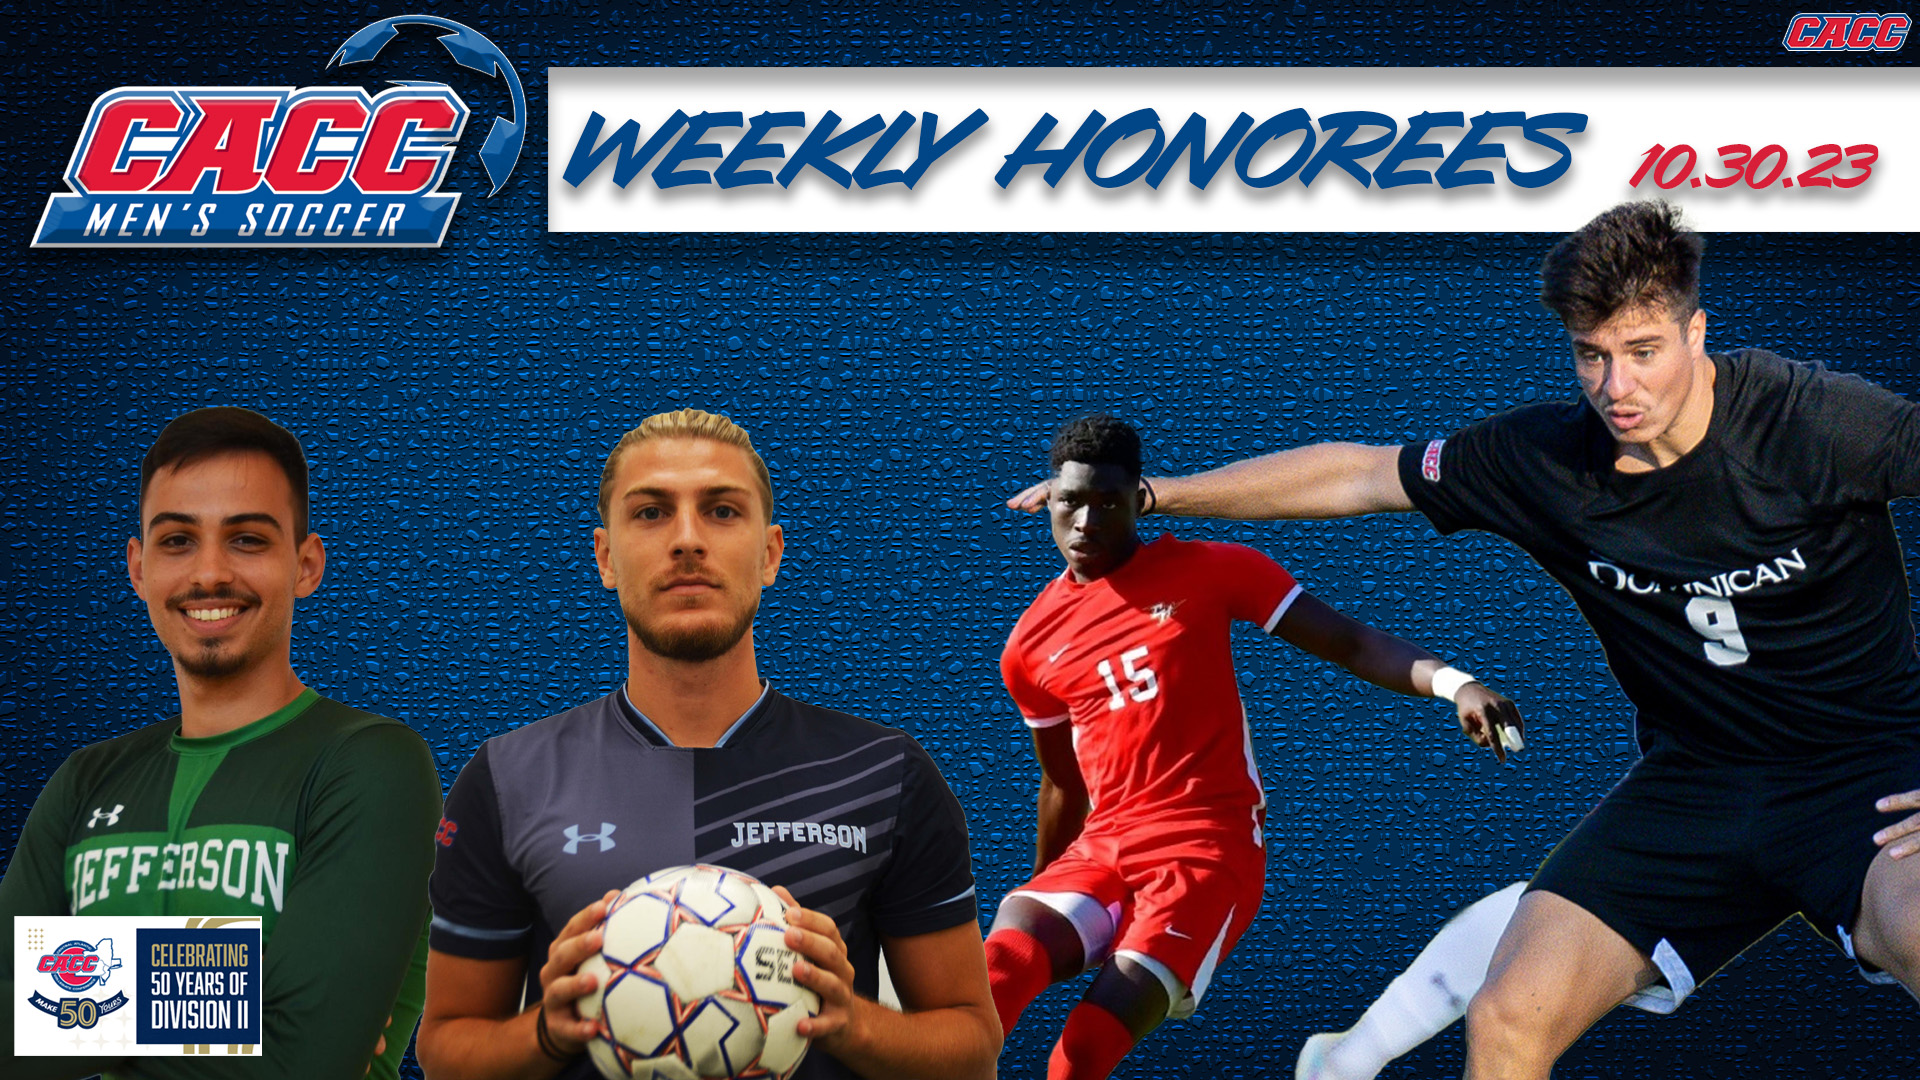 PIRANA NAMED CACC MEN'S SOCCER PLAYER OF THE WEEK